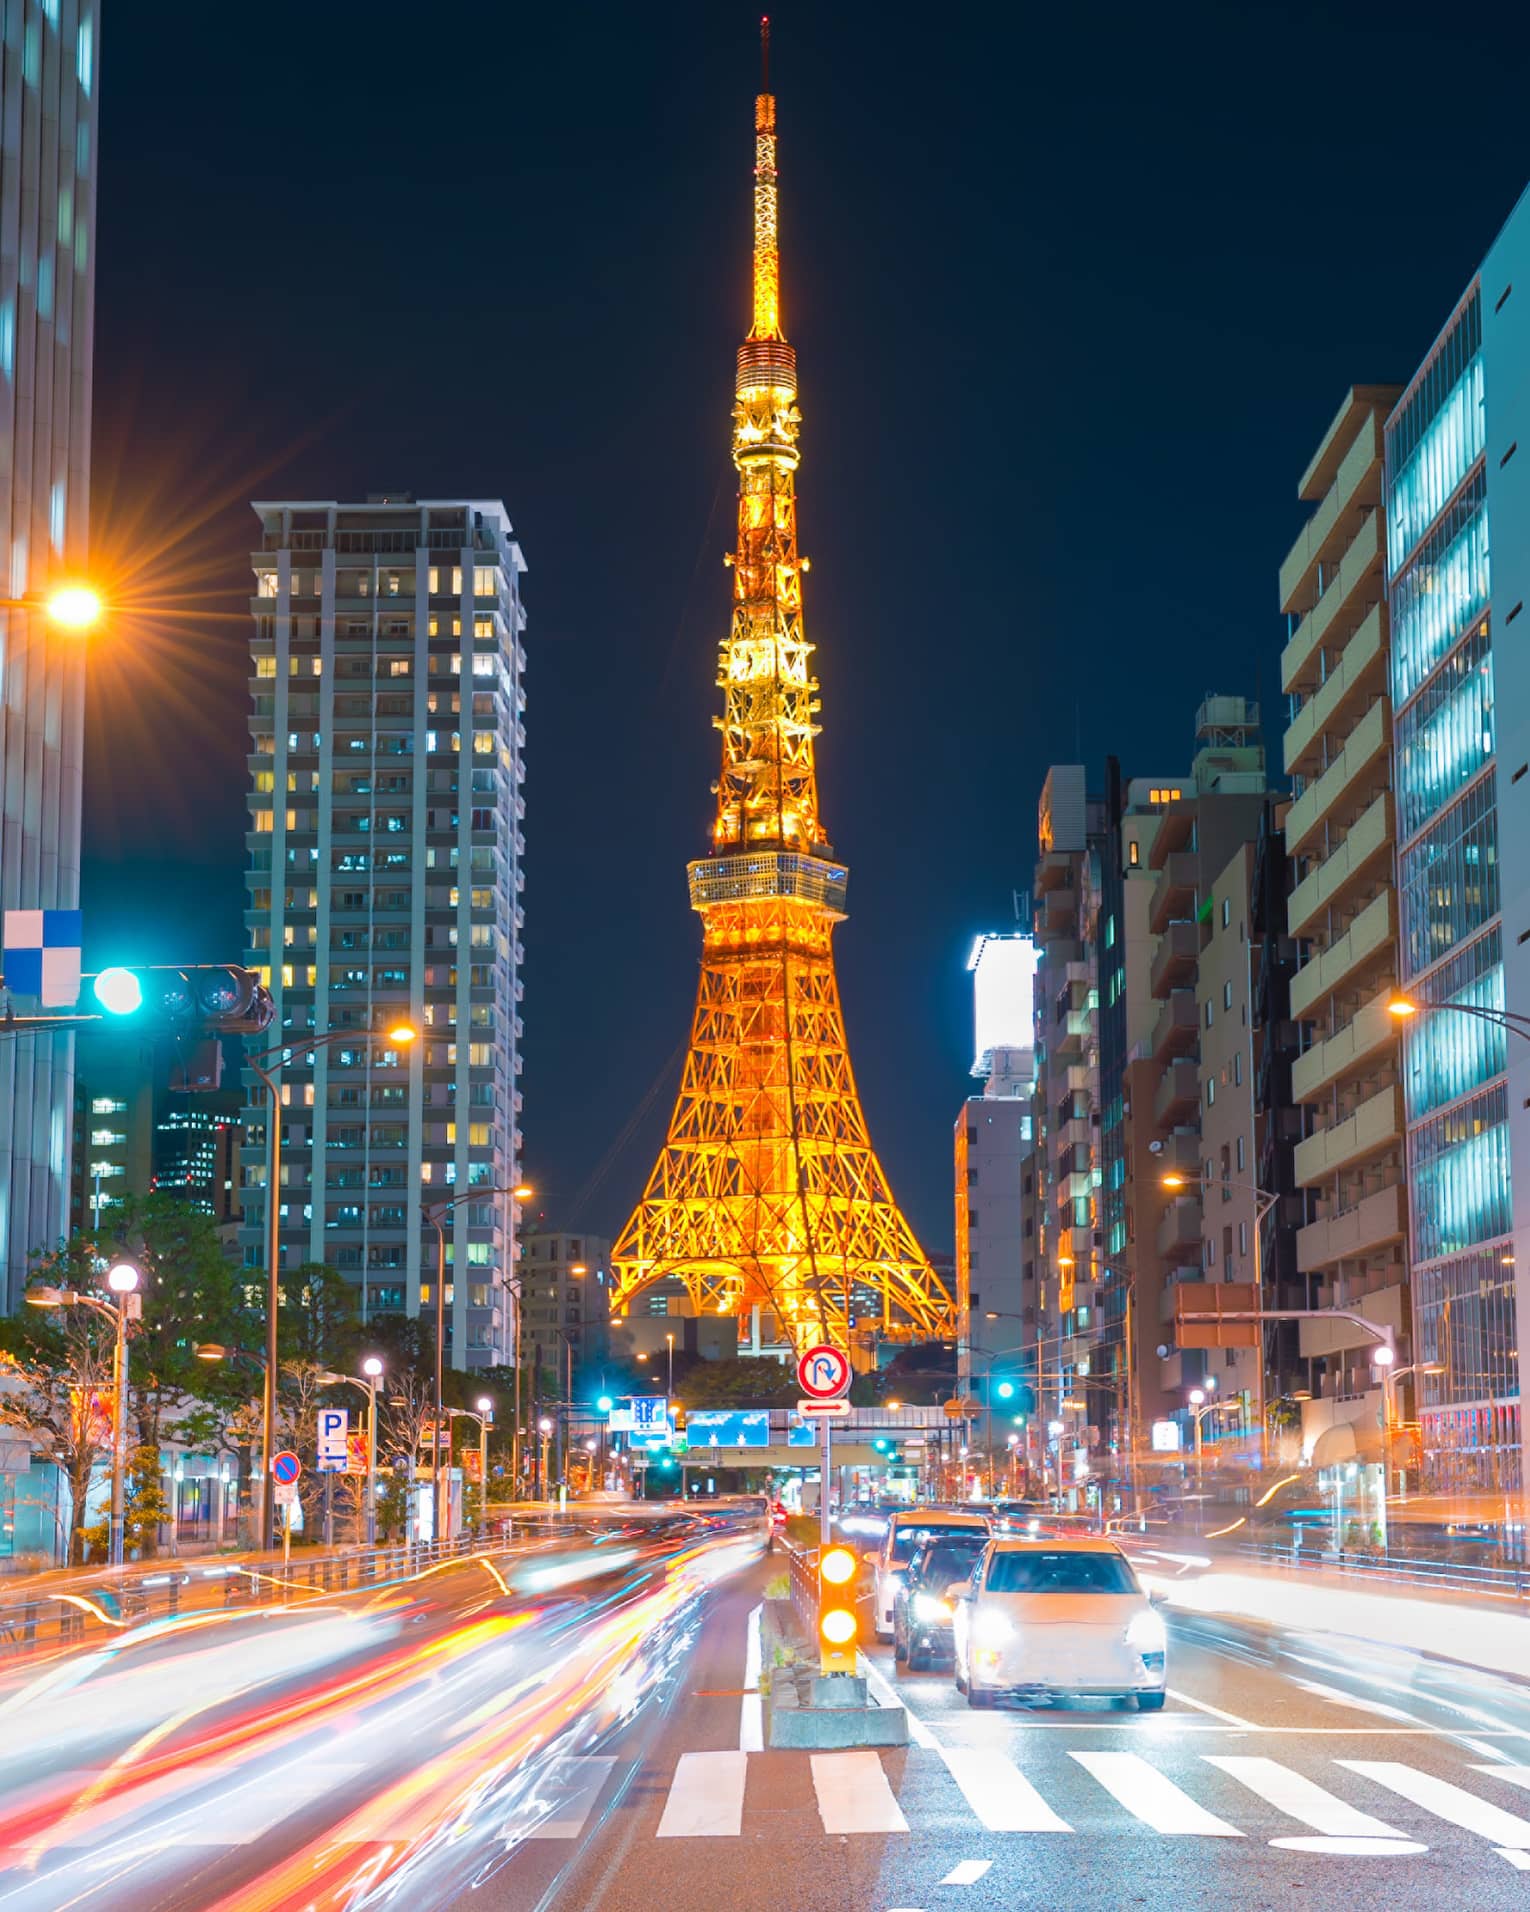 Long view down a brightly-lit street, the Tokyo Tower at the bottom, glowing in orangey hues against an inky-black sky.